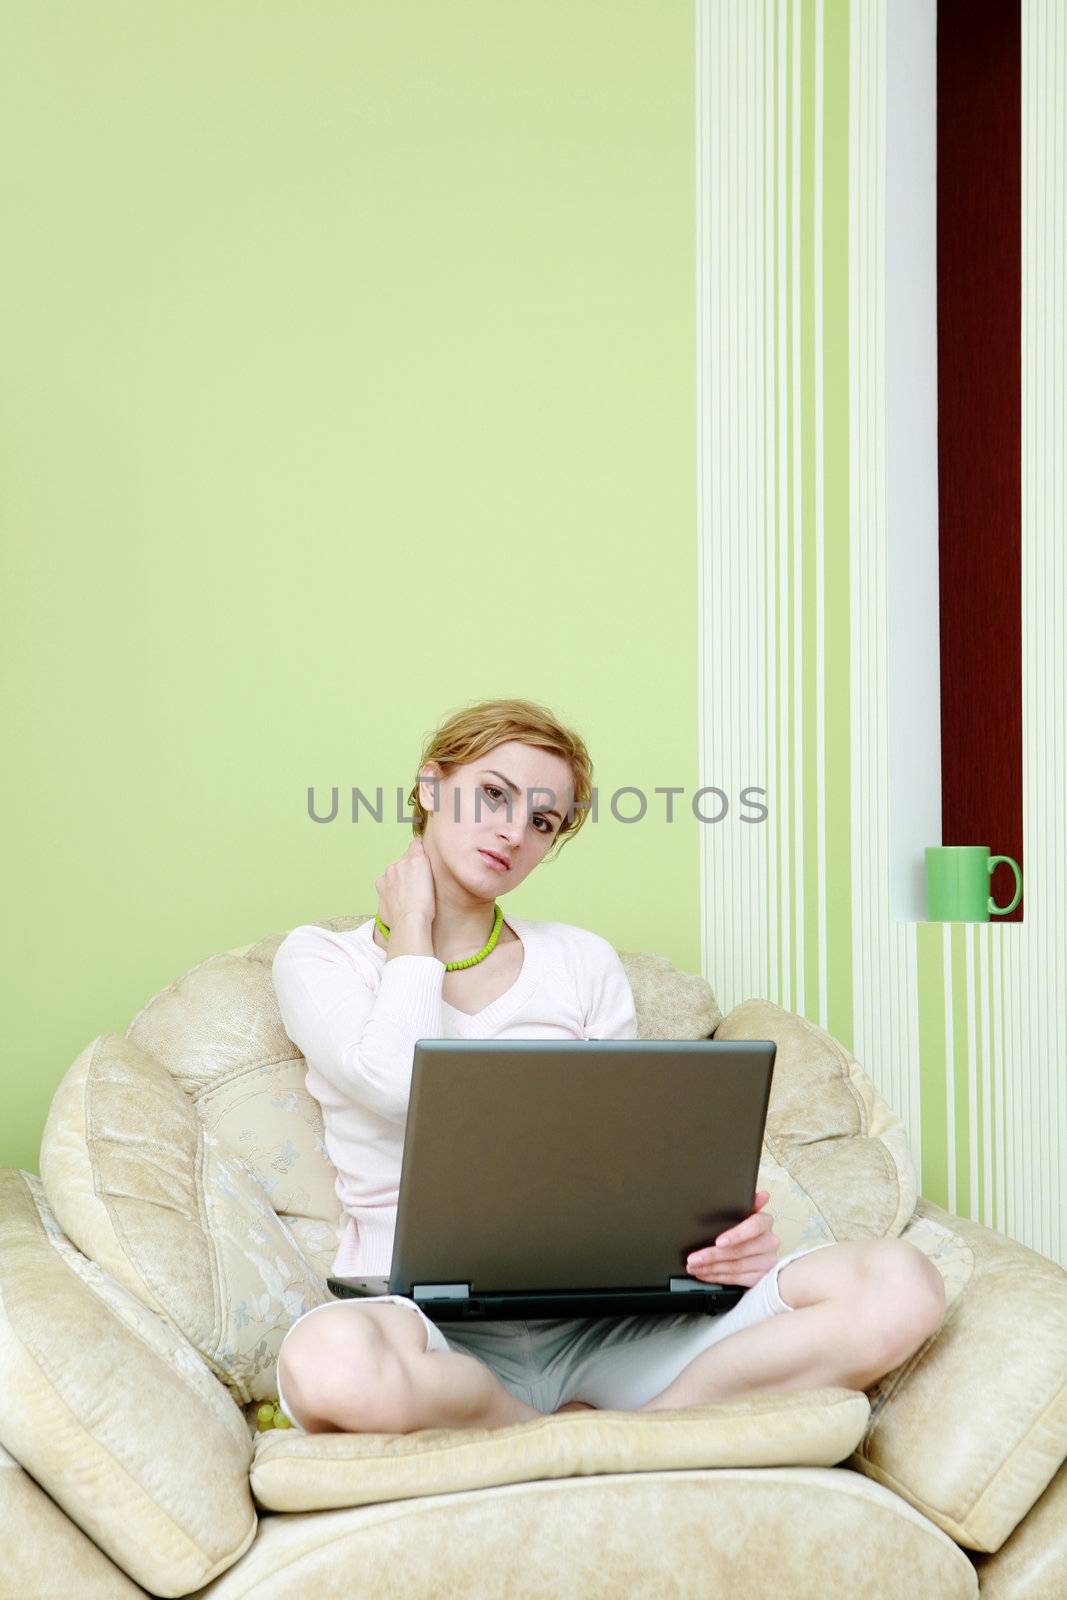 An image of a woman with a laptop in armchair